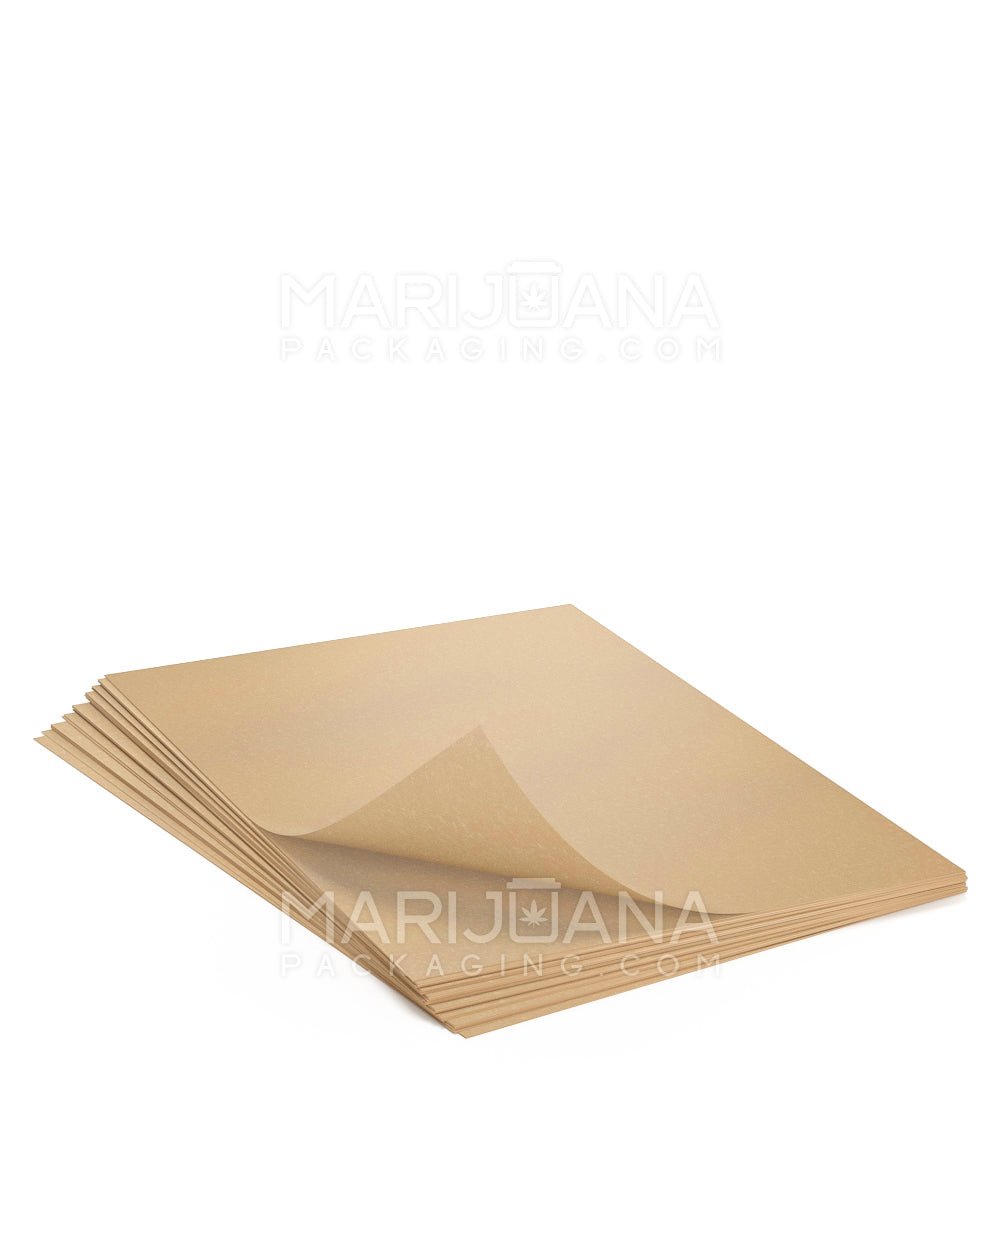 Silicone Coated Parchment Paper | 24in x 16in - Natural Brown - 100 Count - 4